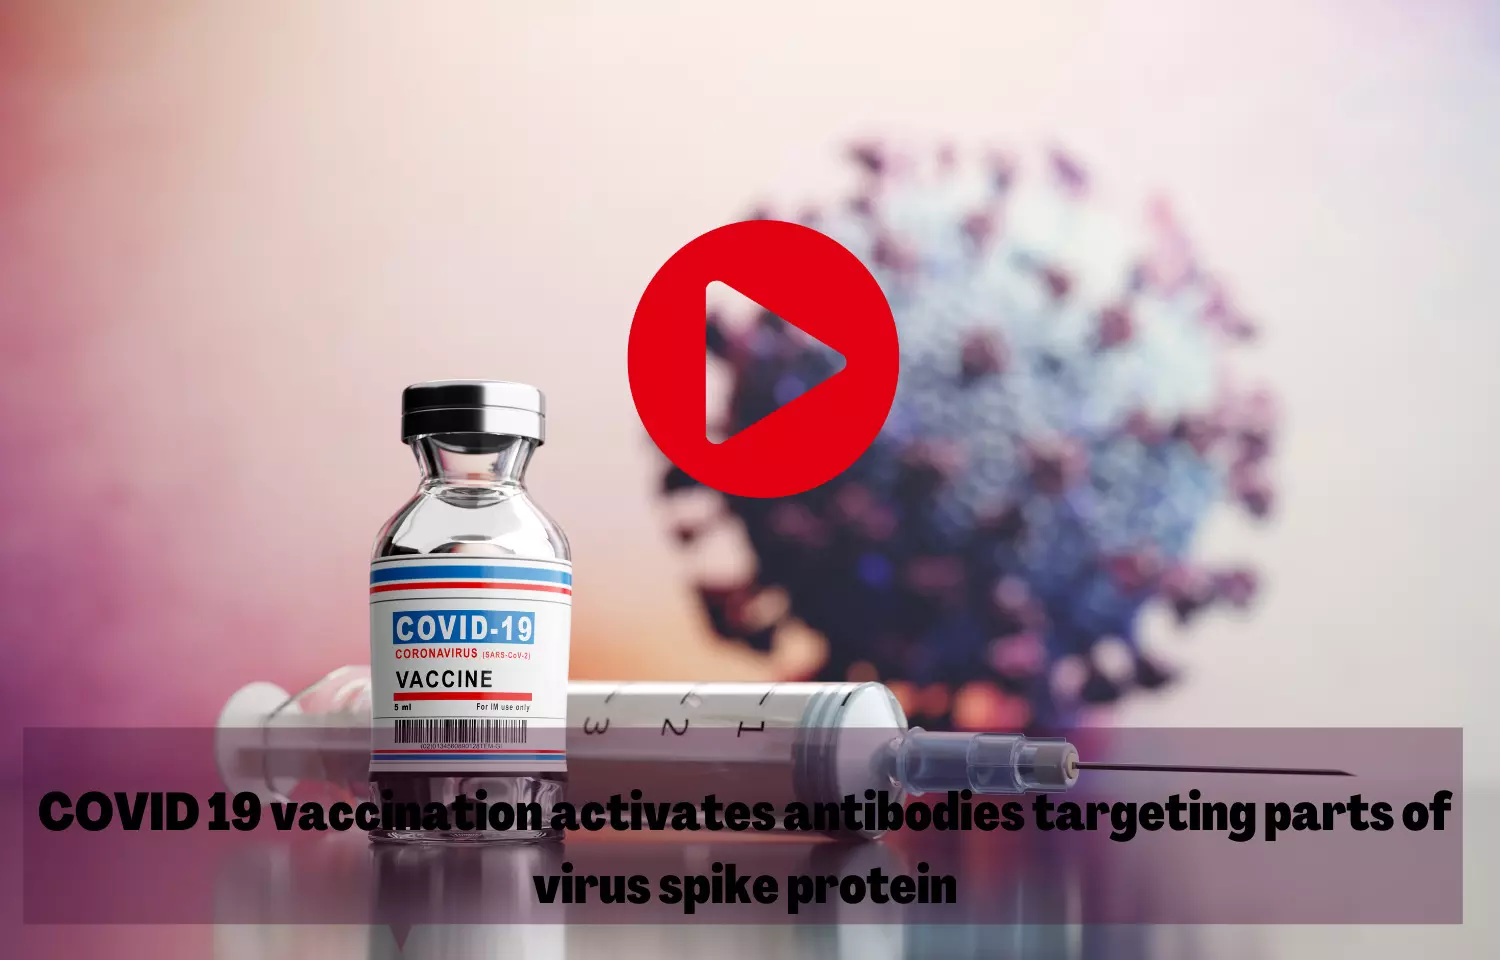 COVID 19 vaccination activates antibodies targeting parts of virus spike protein